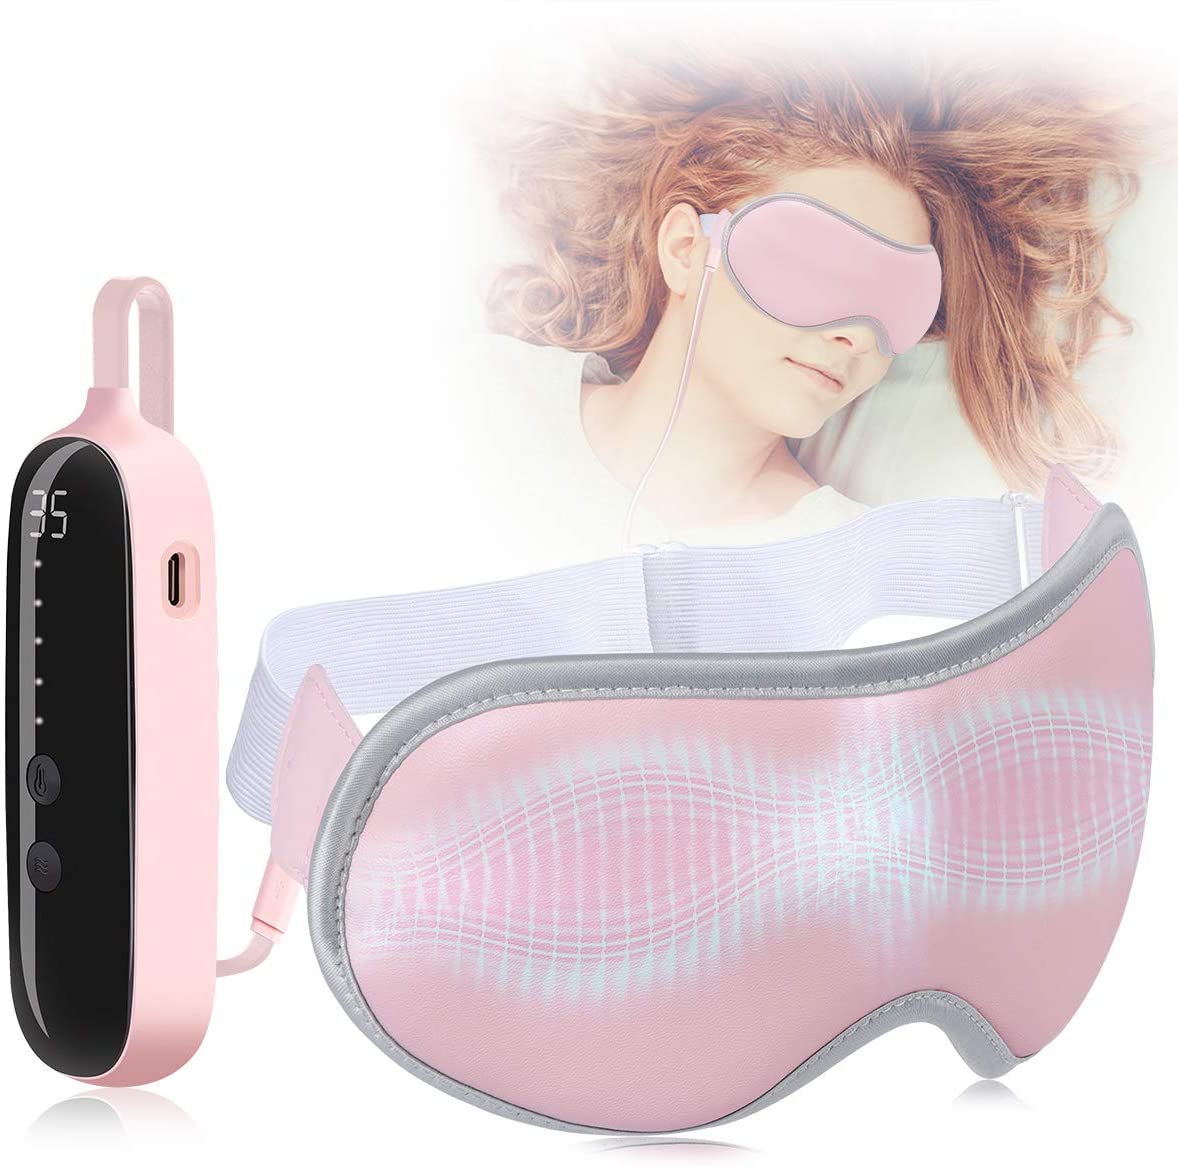 OUVEROLA Heated Eye Massager with 5 Vibration Mode and Adjustable Temp